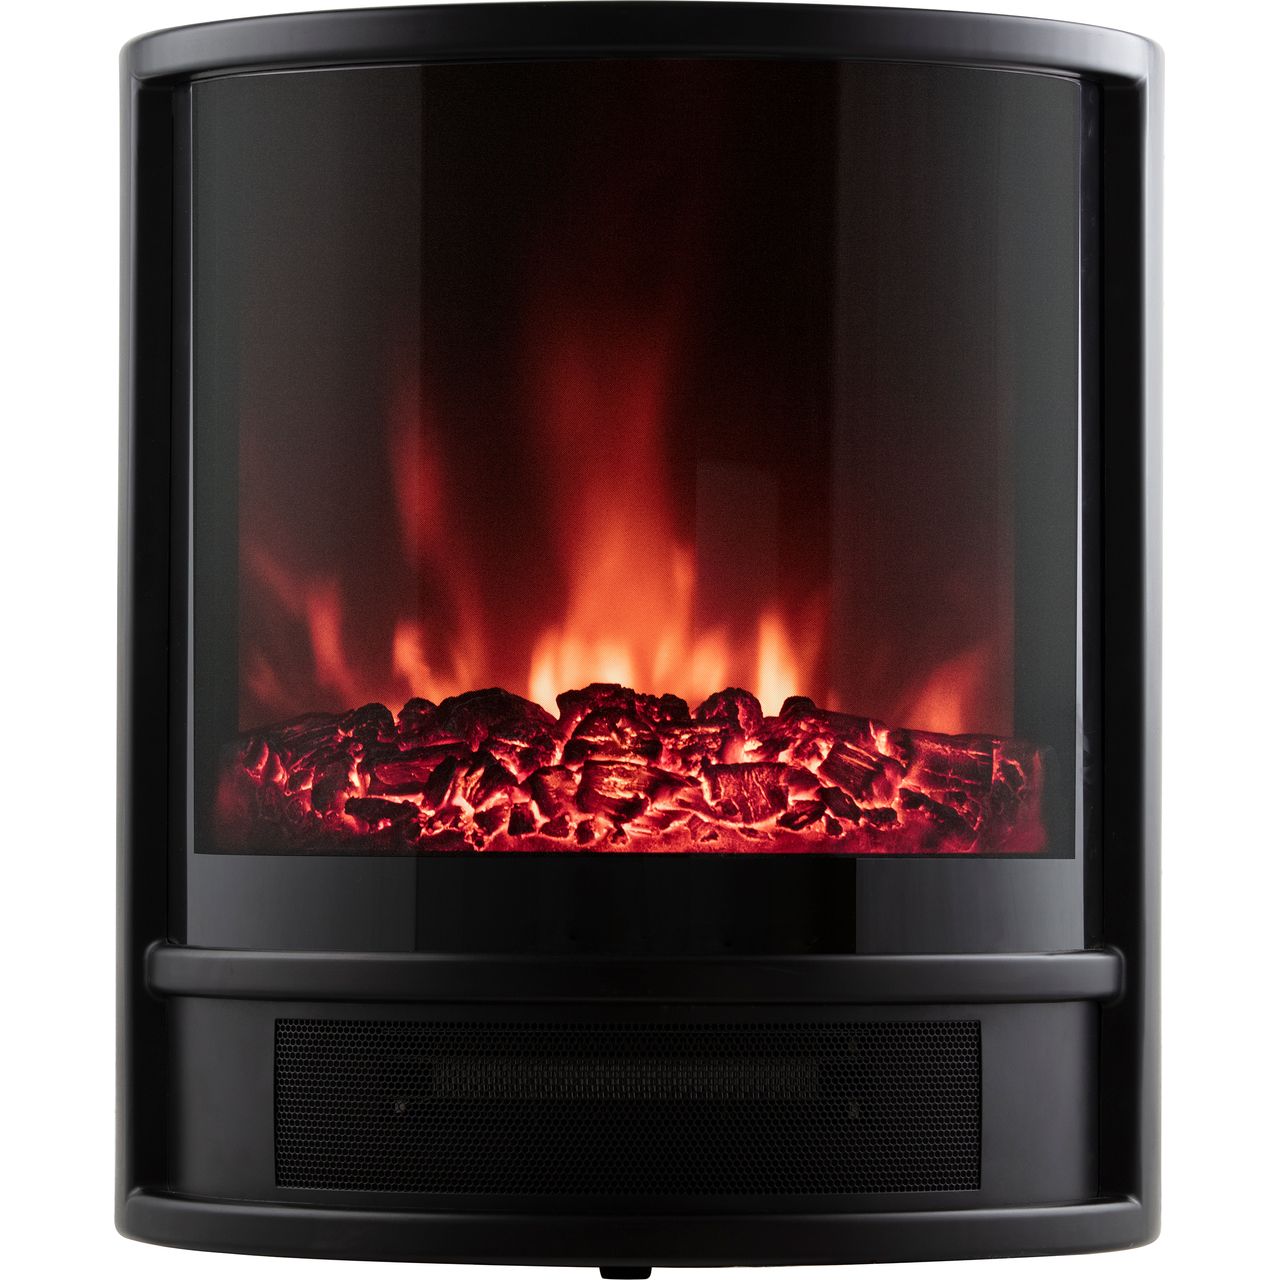 Warmlite WL46031 Log Effect Electric Stove Review